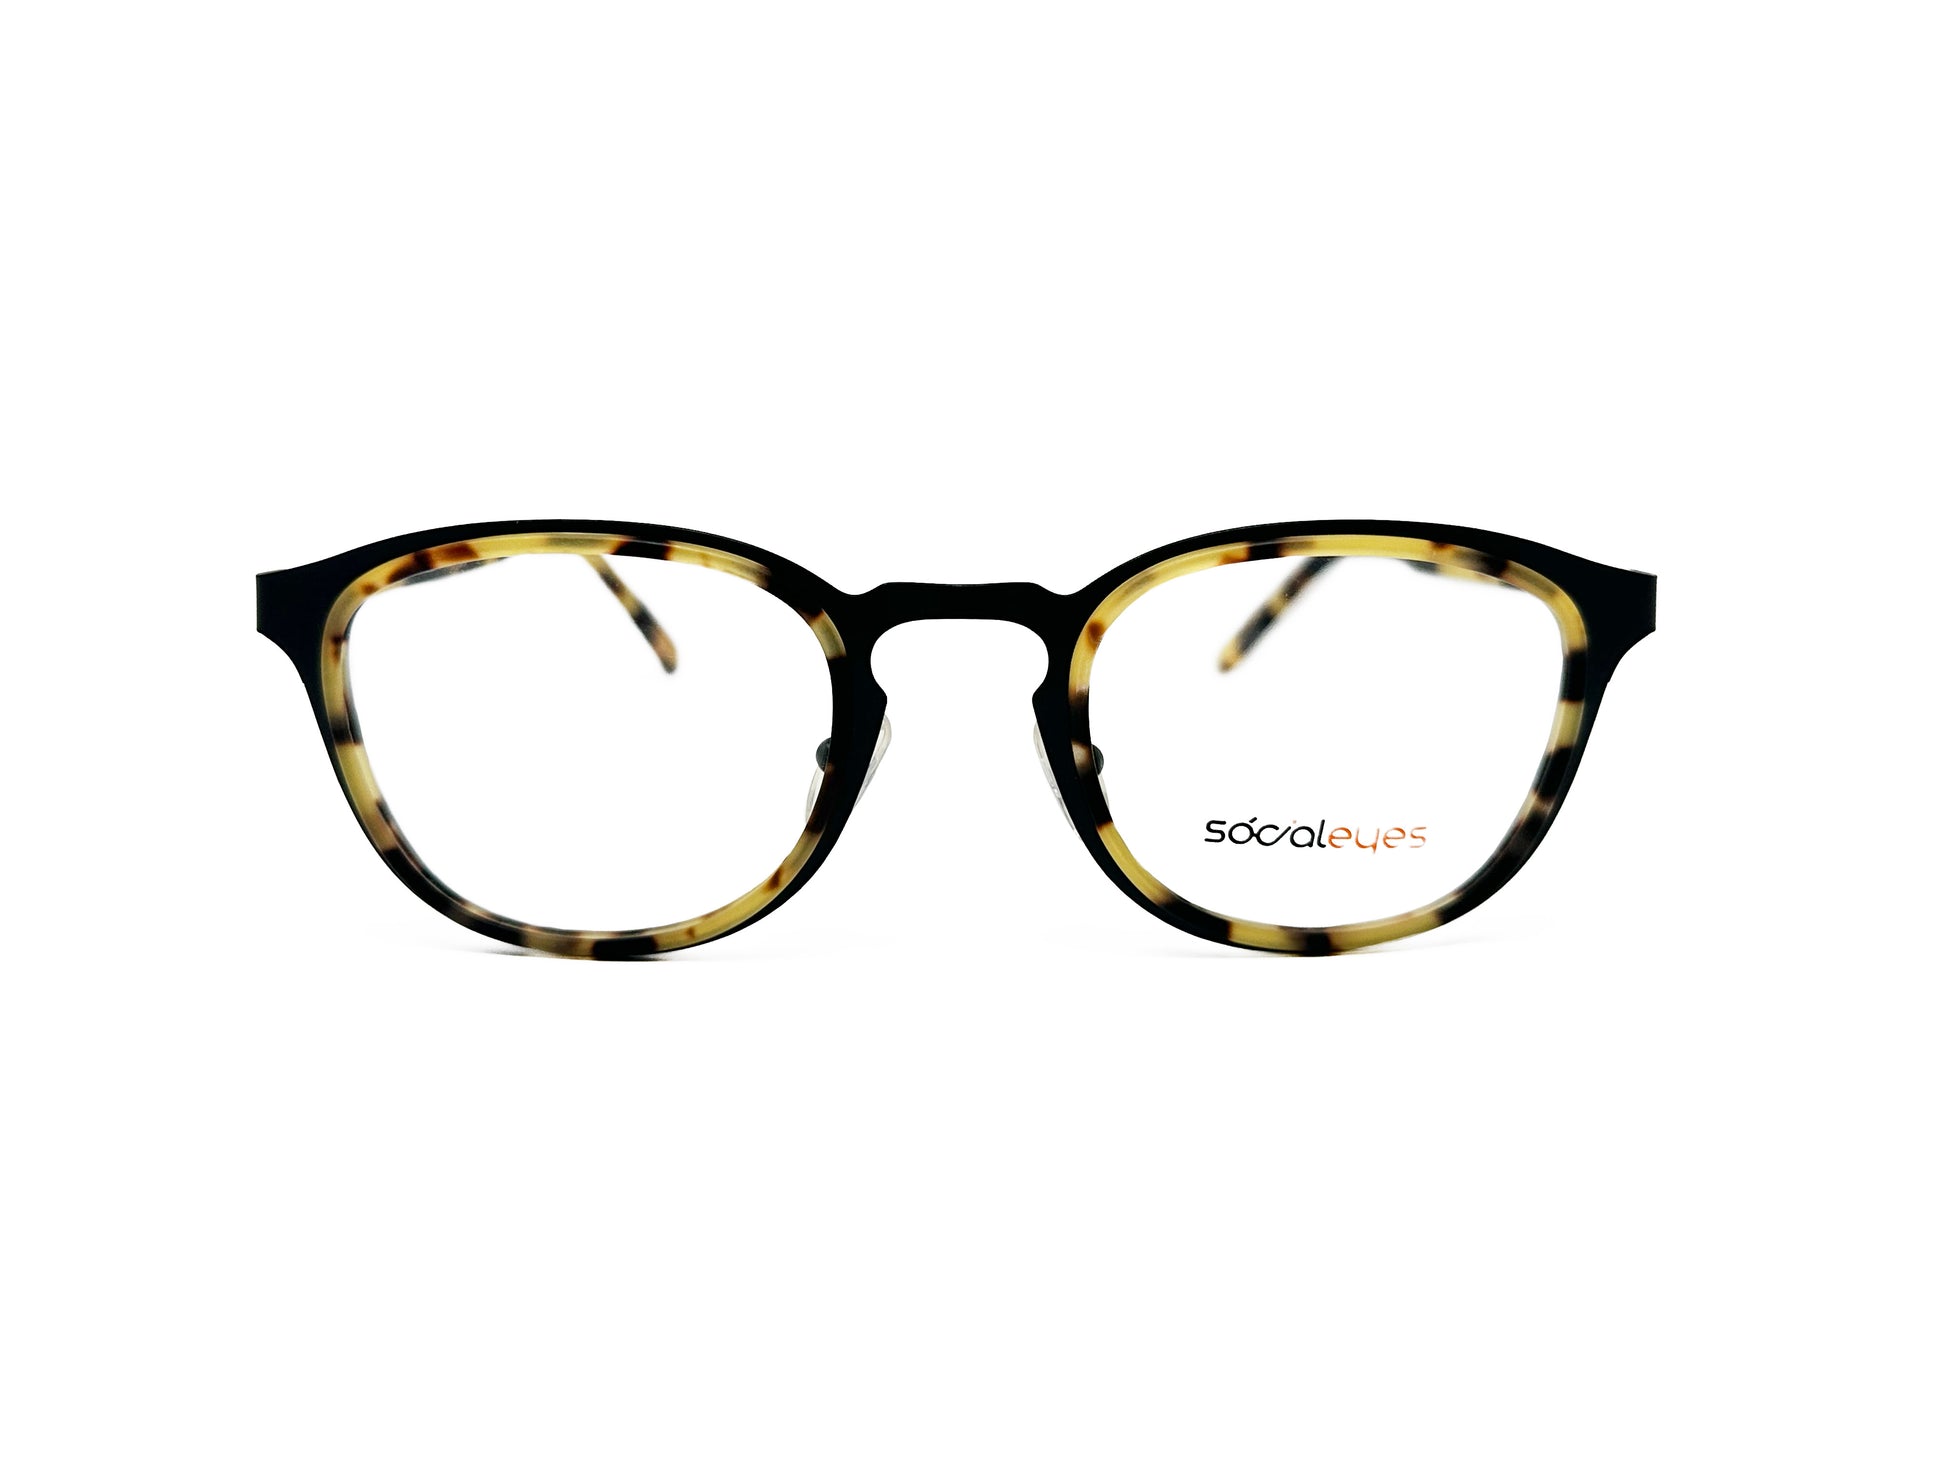 Social Eyes rounded-square metal optical frame. Model: Gunner. Color: C03 - Black metal with Japanese Havana lining. Front view.